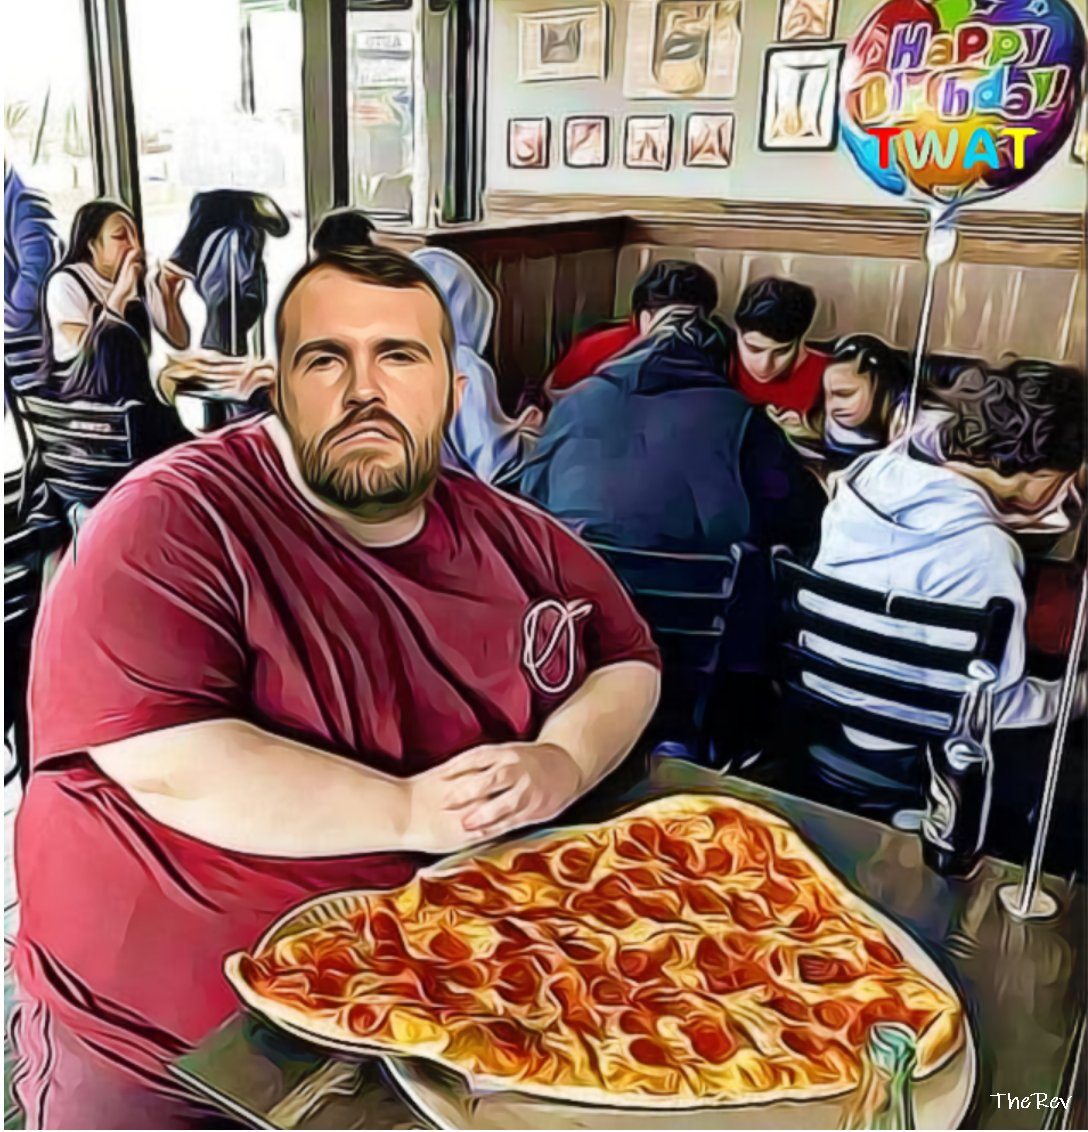 Differences apart a Happy 34th Birthday to Jonathan Gullis. I got him a pizza and a balloon.  
#ToriesOut551 #GullisOut #Gullis #Gullisis34 #GTTONow #GTTO2024